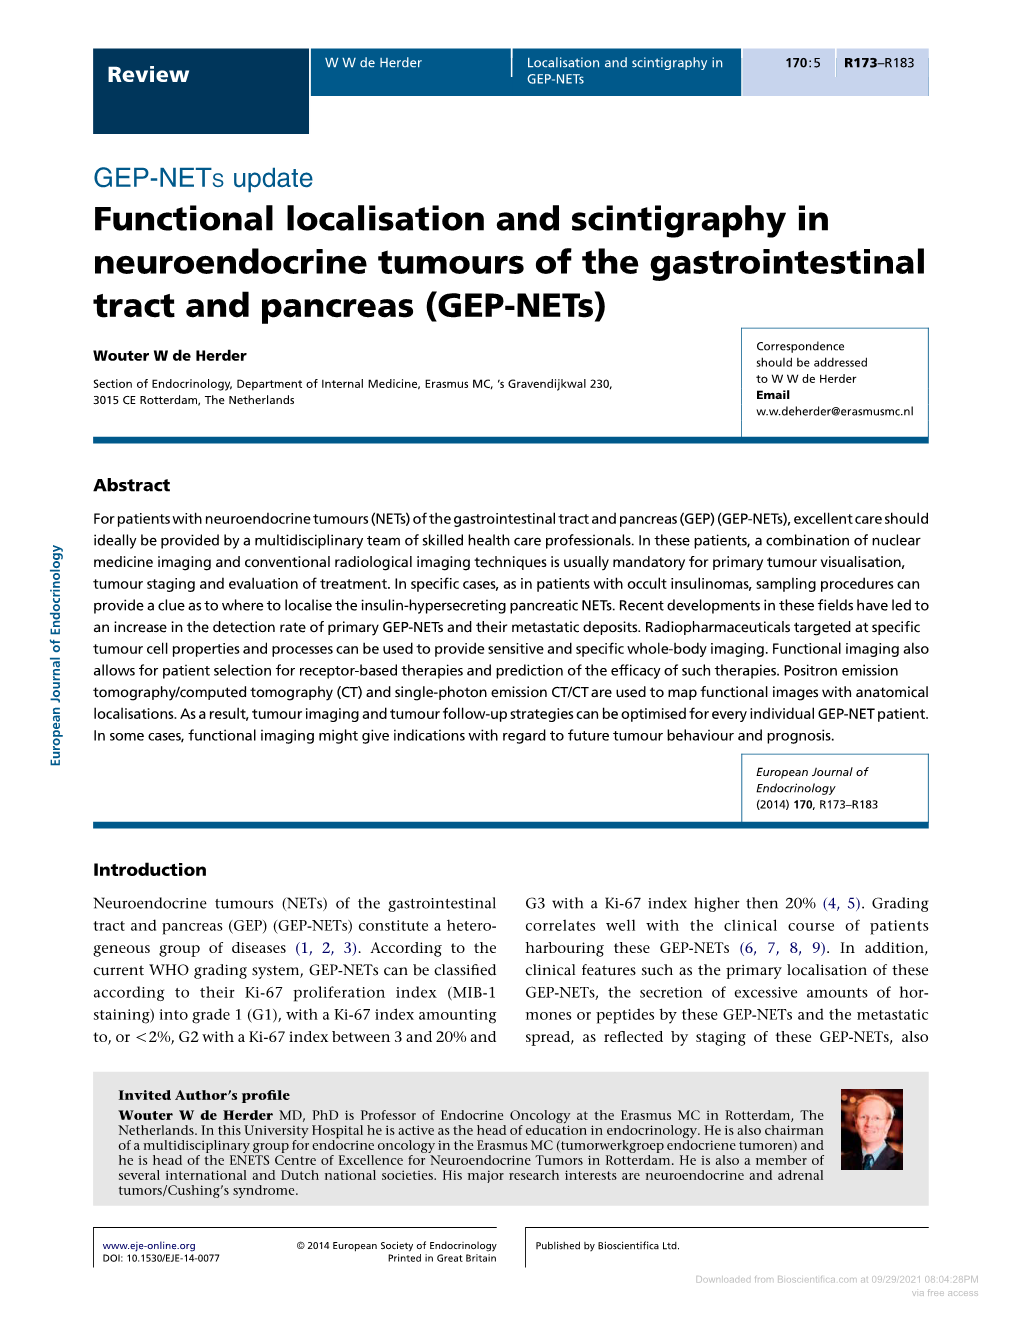 Functional Localisation and Scintigraphy in Neuroendocrine Tumours of the Gastrointestinal Tract and Pancreas (GEP-Nets)